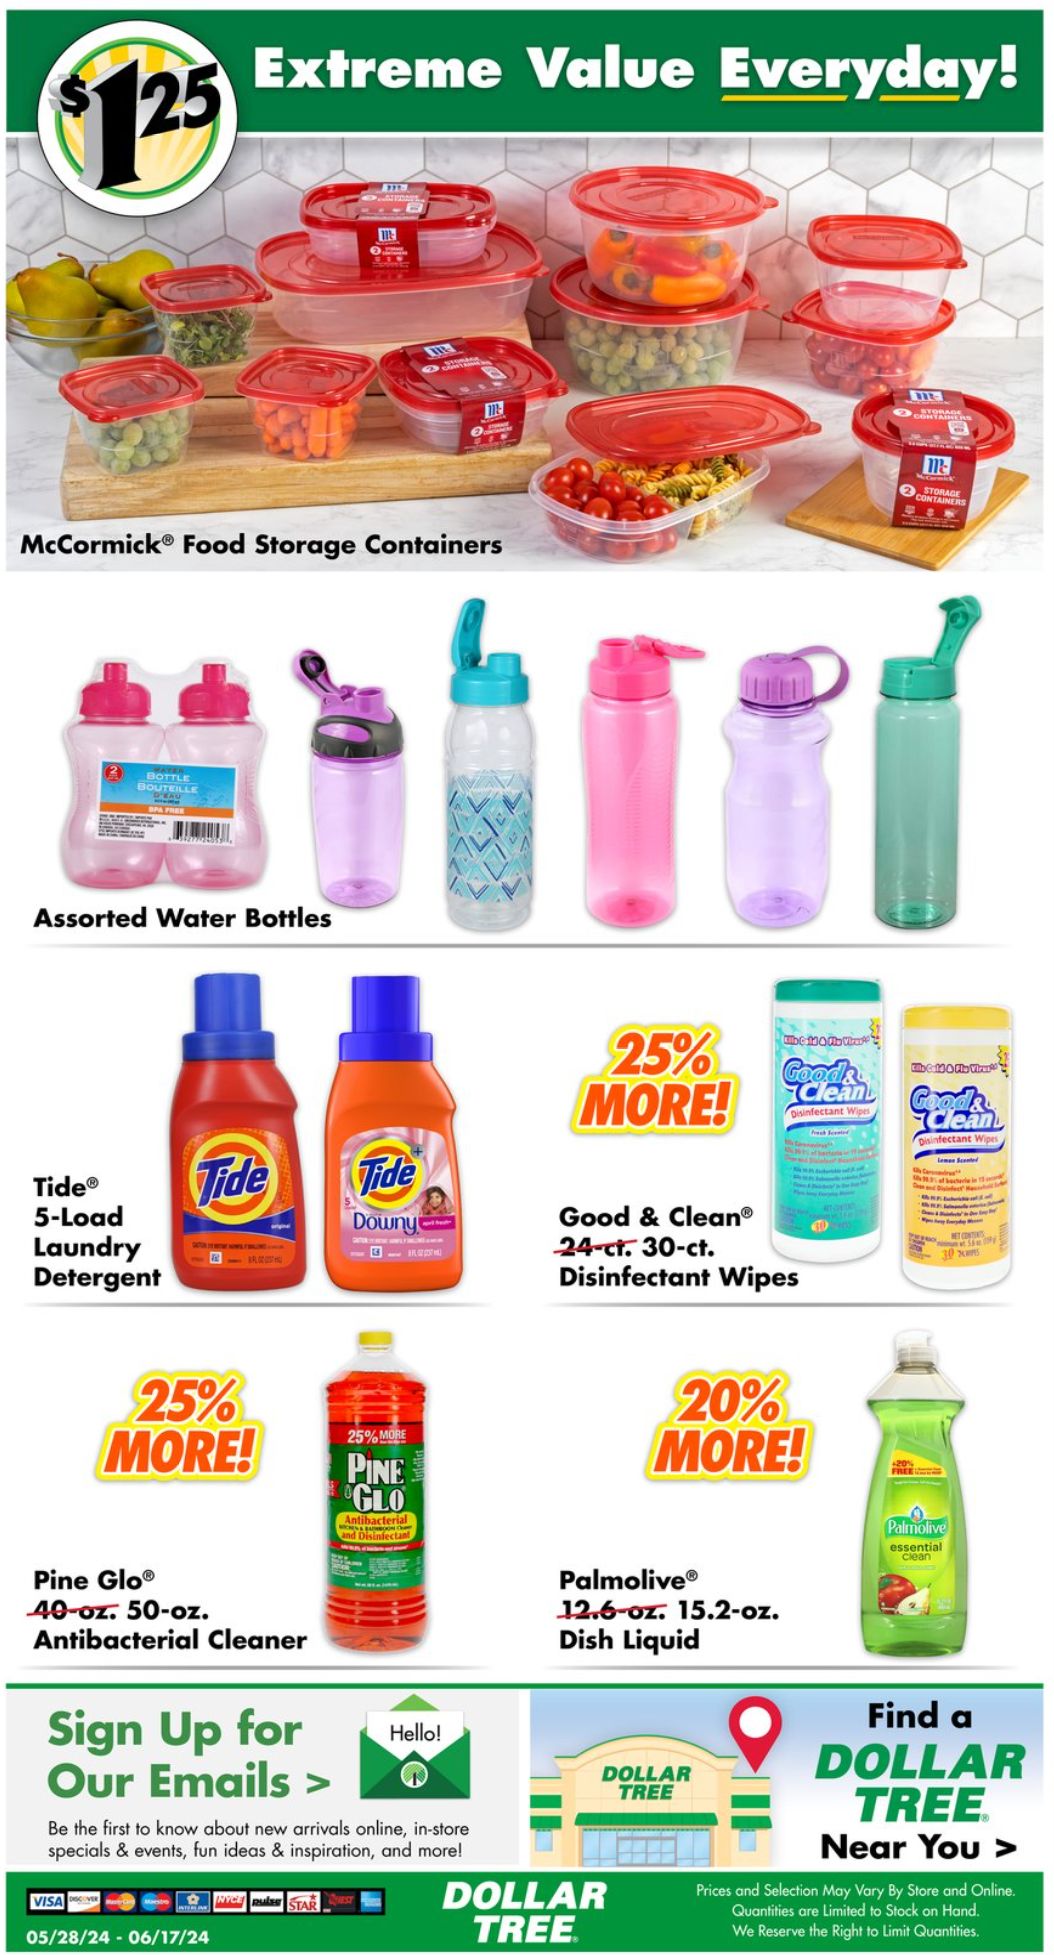 Dollar Tree July 2024 Weekly Sales, Deals, Discounts and Digital Coupons.